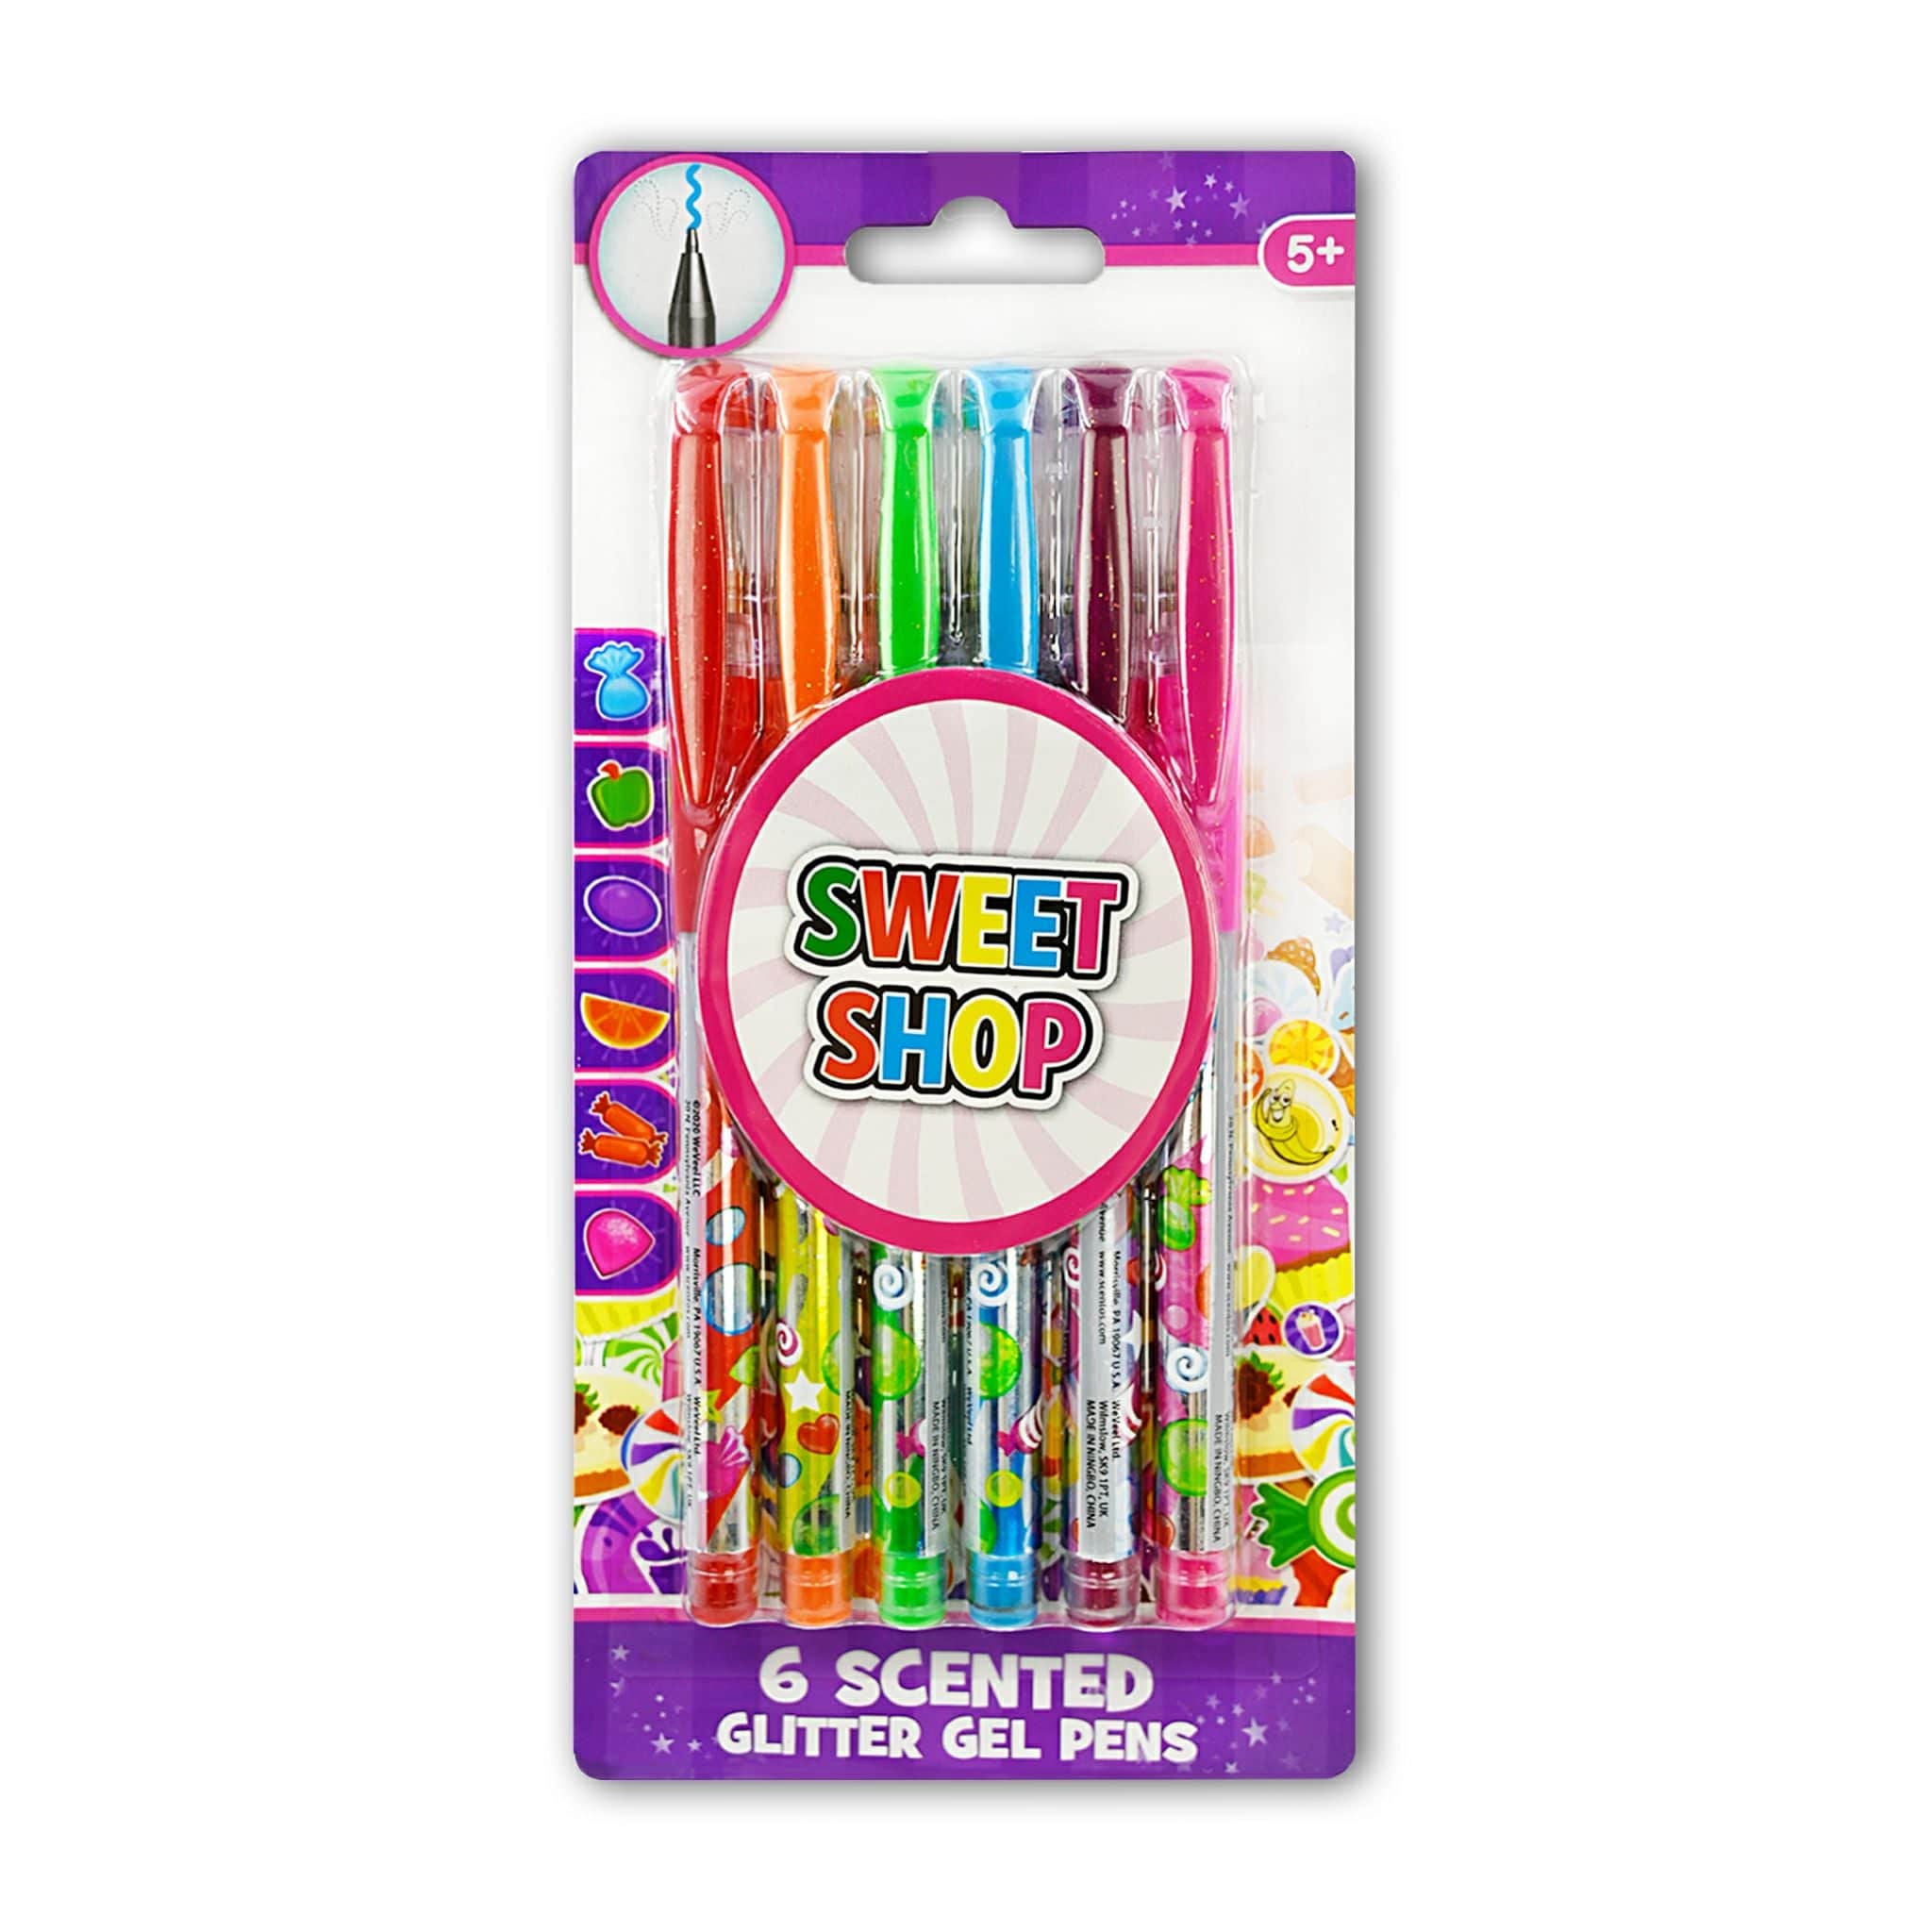 Bargain catcher - *AD Scentos Candy Scented Gel Pens Sugar Rush Pack of 20  £5.99  *